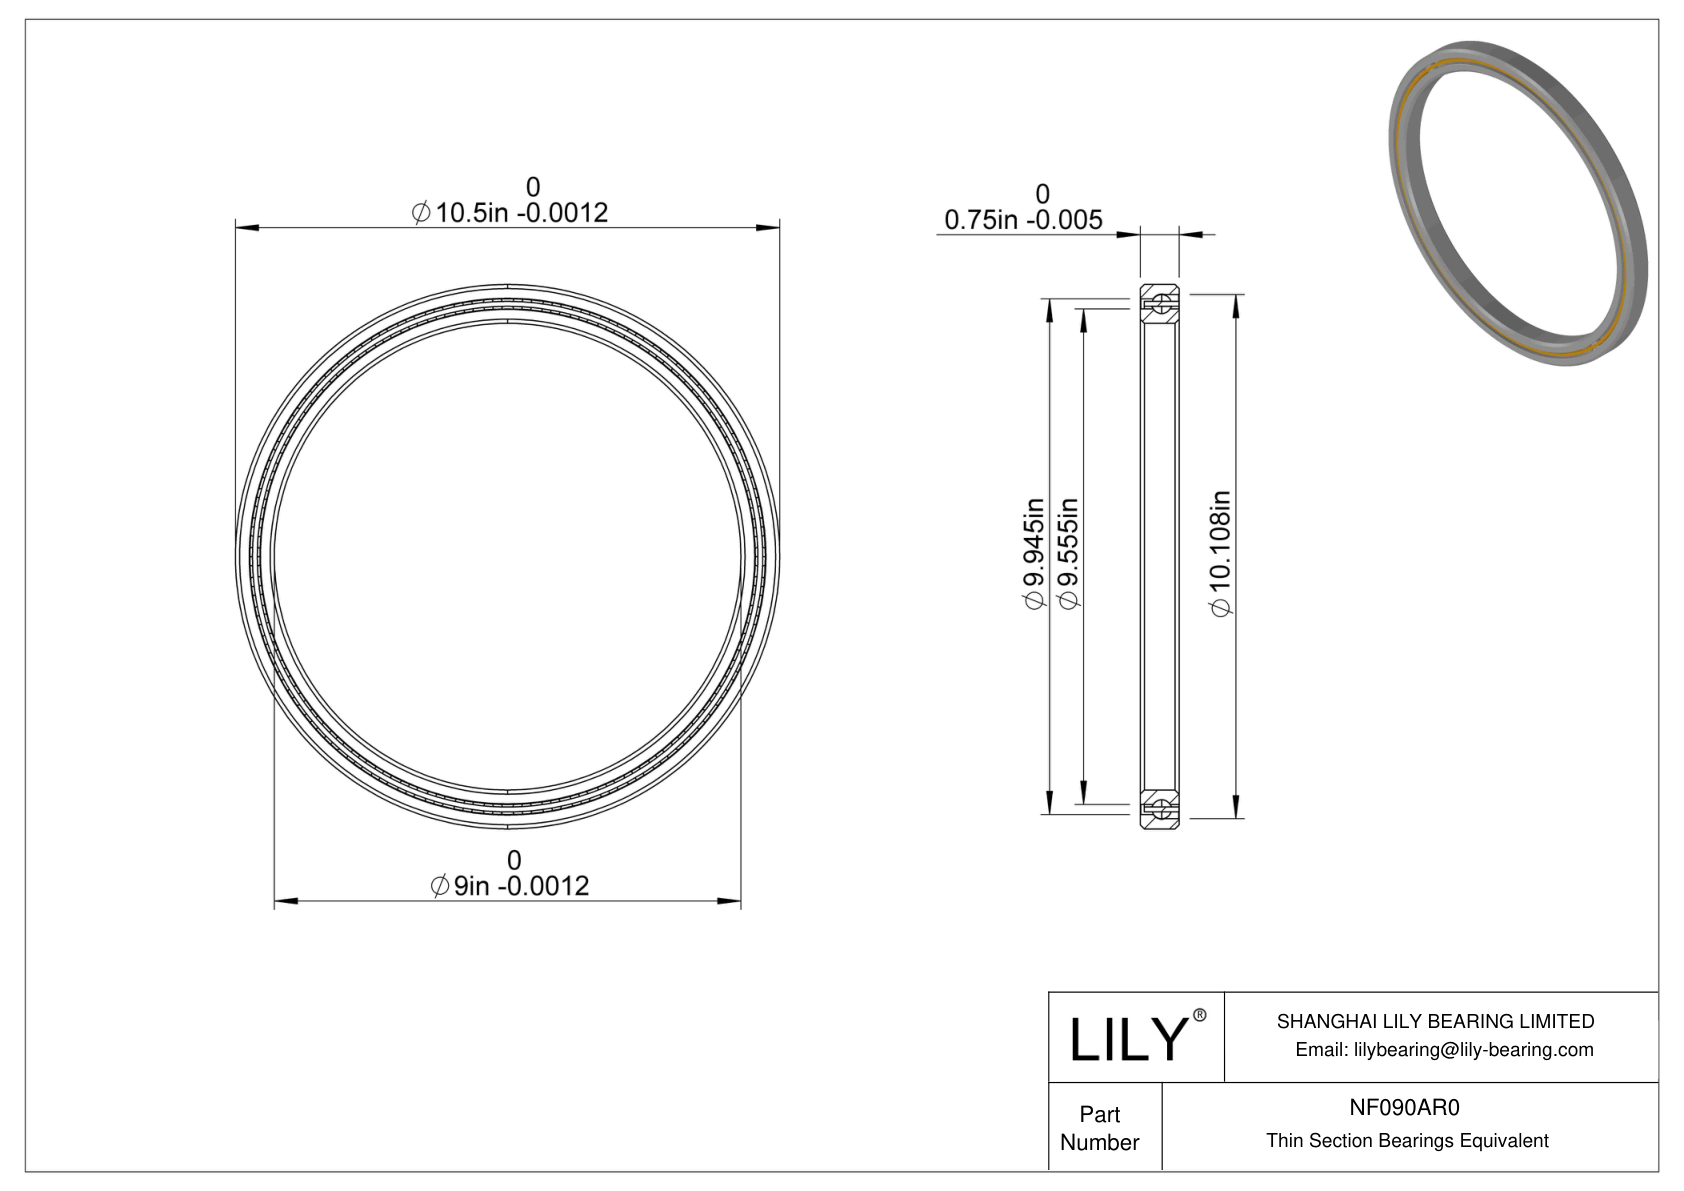 NF090AR0 Constant Section (CS) Bearings cad drawing